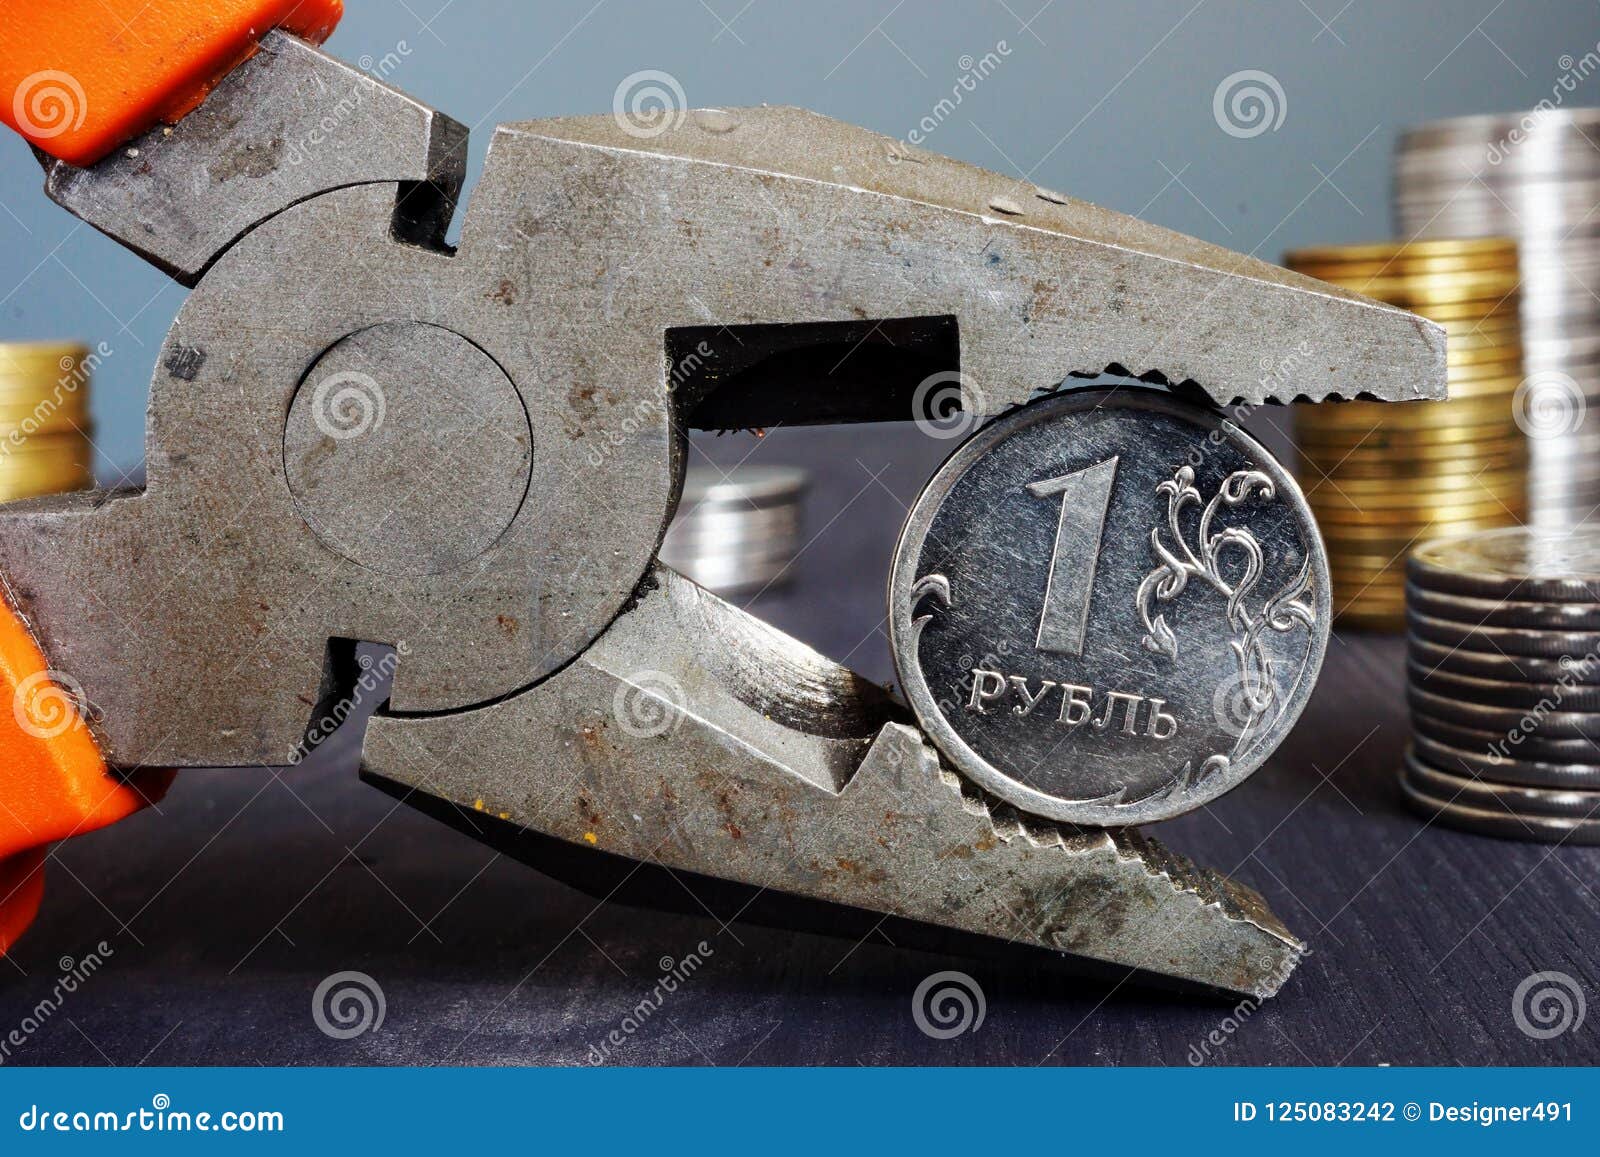 sanctions for russia and inflation. pliers holding russian ruble.